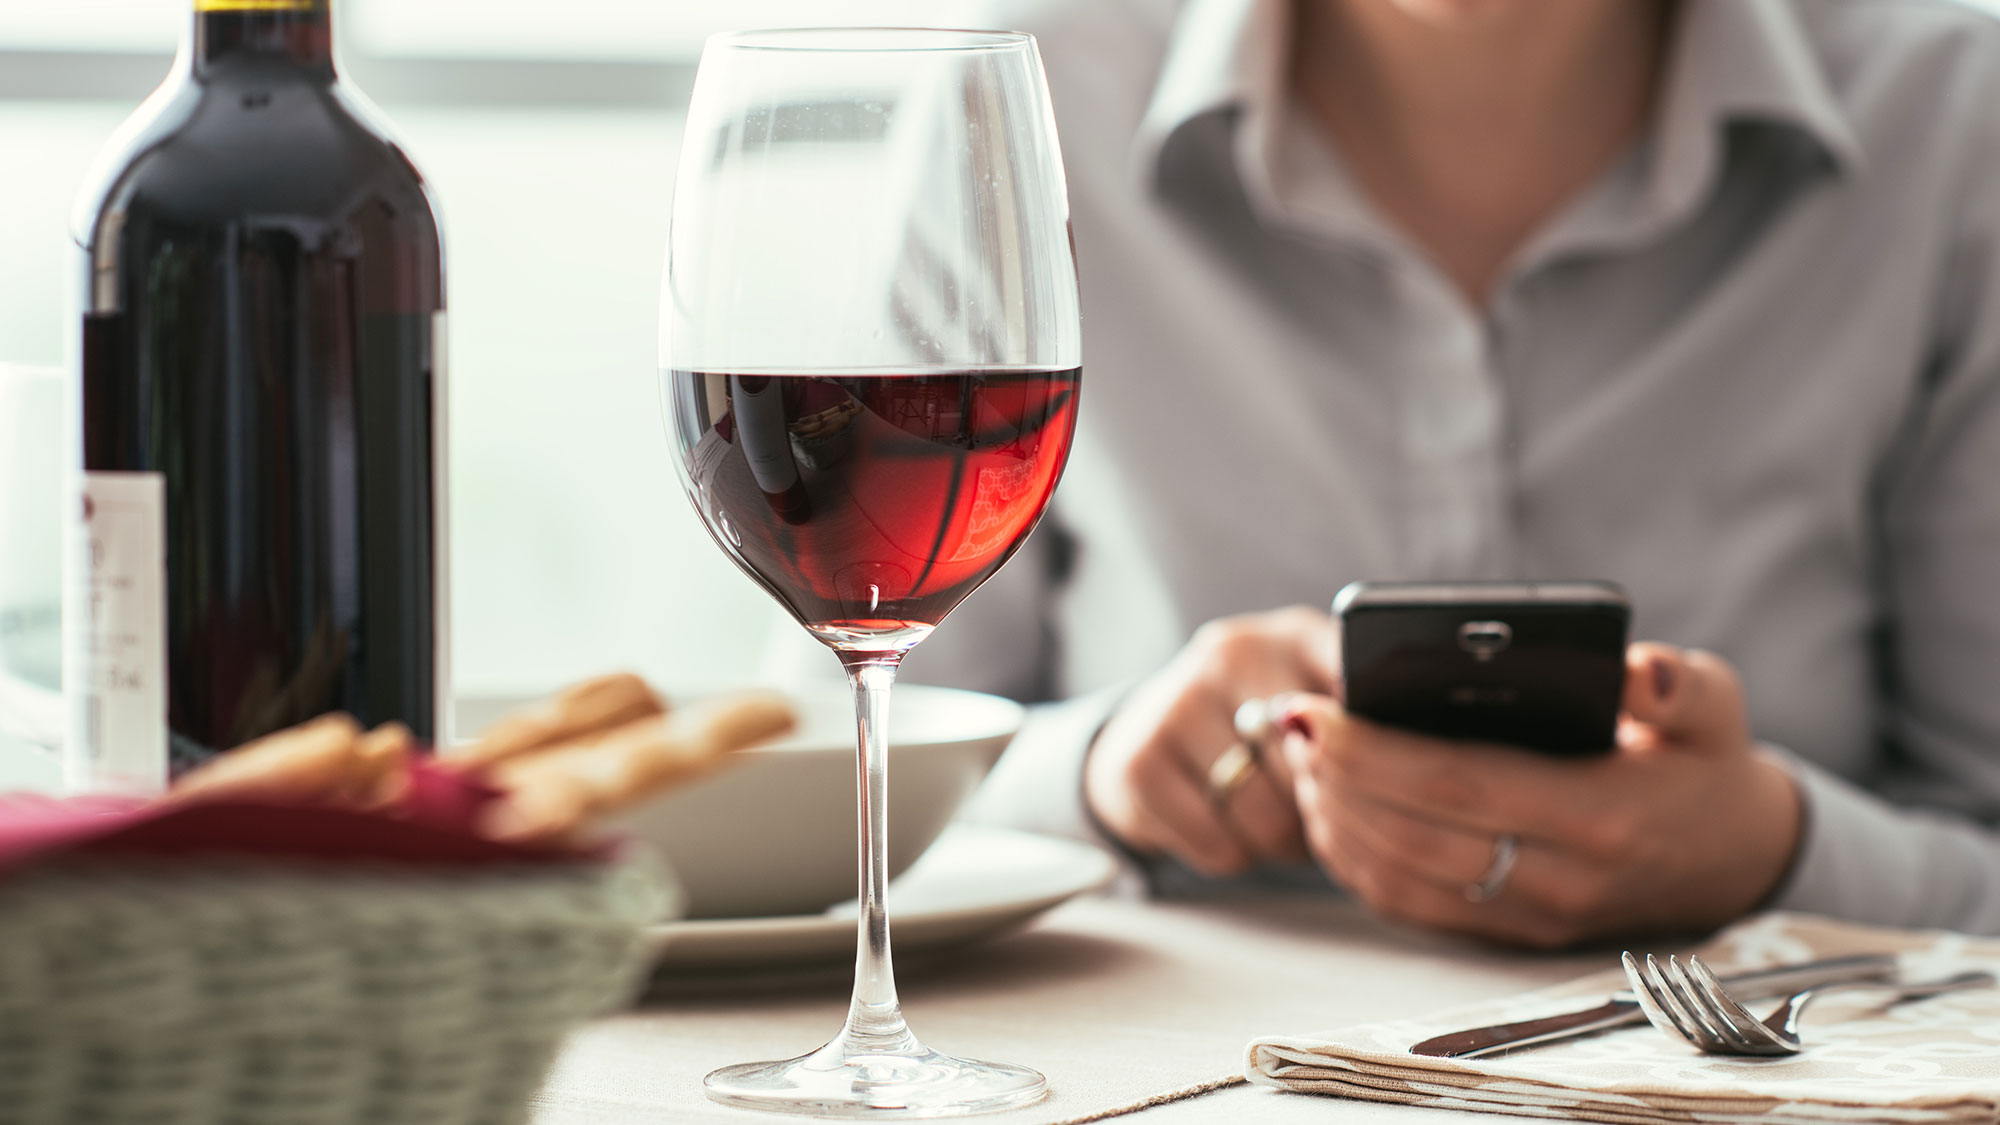 This Italian Restaurant Will Give You A Free Bottle of Wine If You Hand in Your Phone